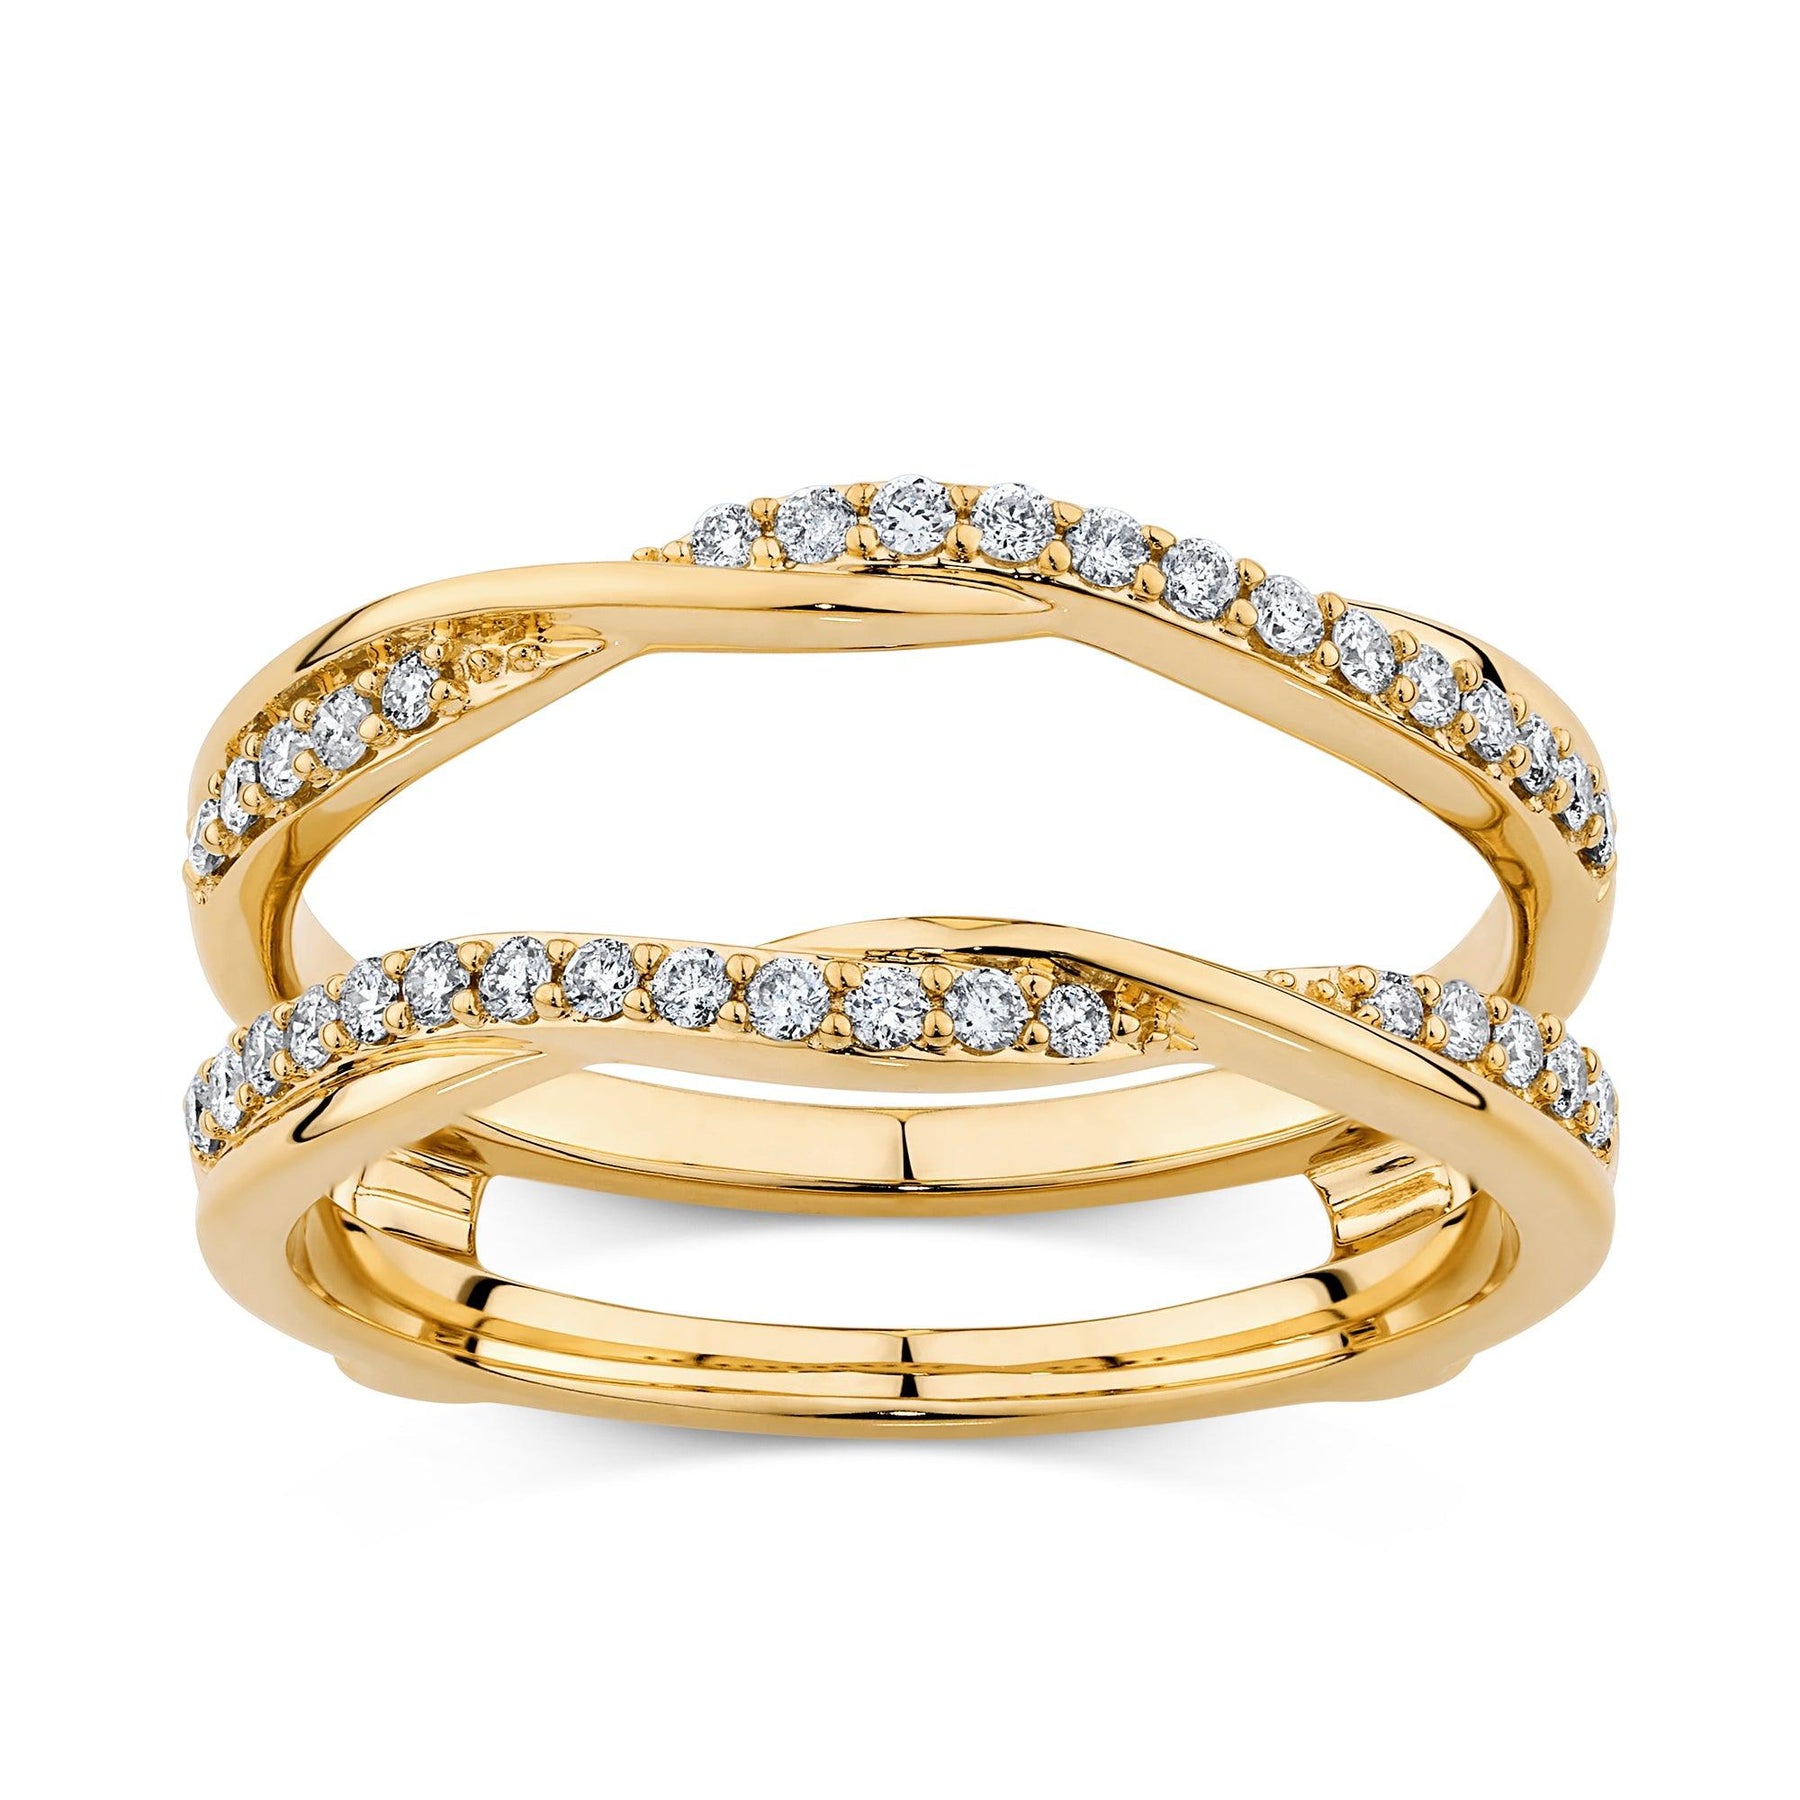 0.25ct TW Diamond Double Wedding Band in 9ct Yellow Gold - Wallace Bishop